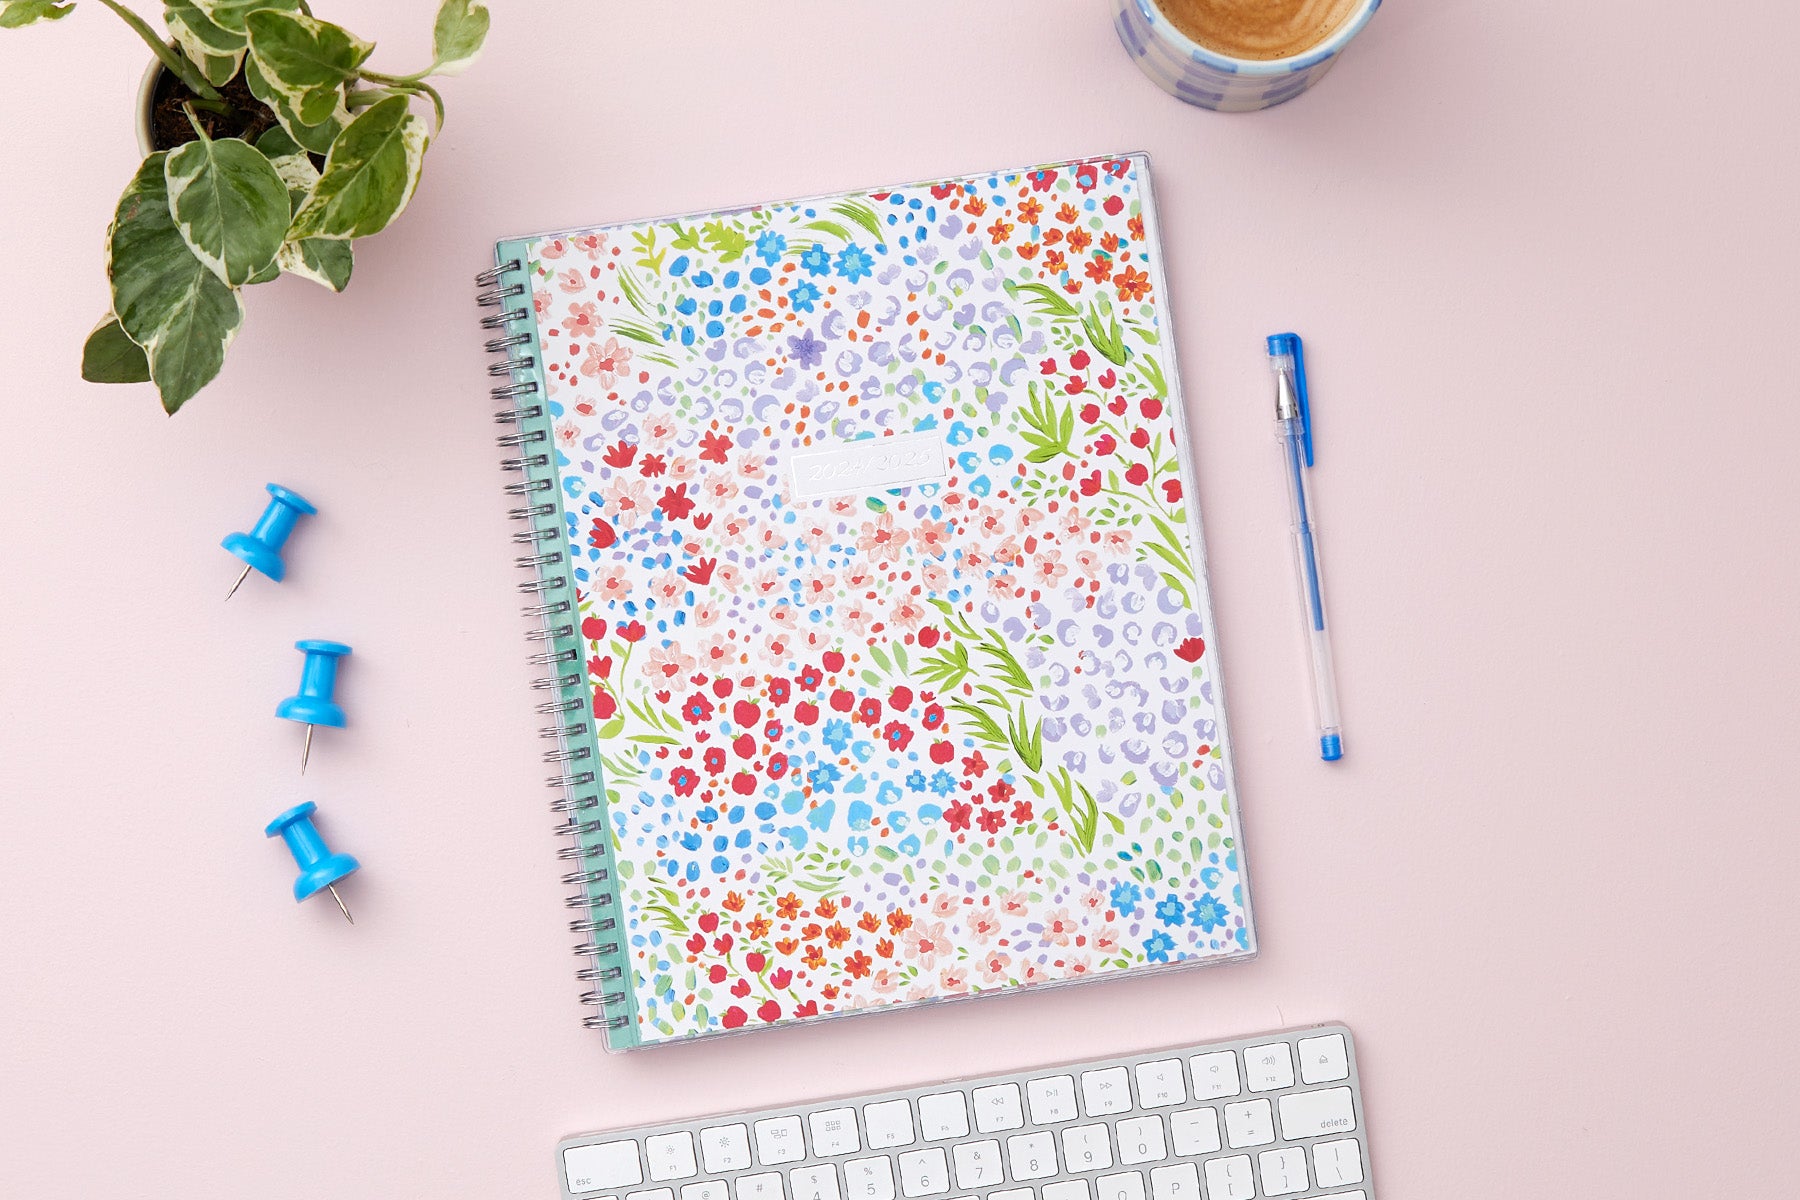 Shop All of Blue Sky | Planners, Calendars, and Notebooks